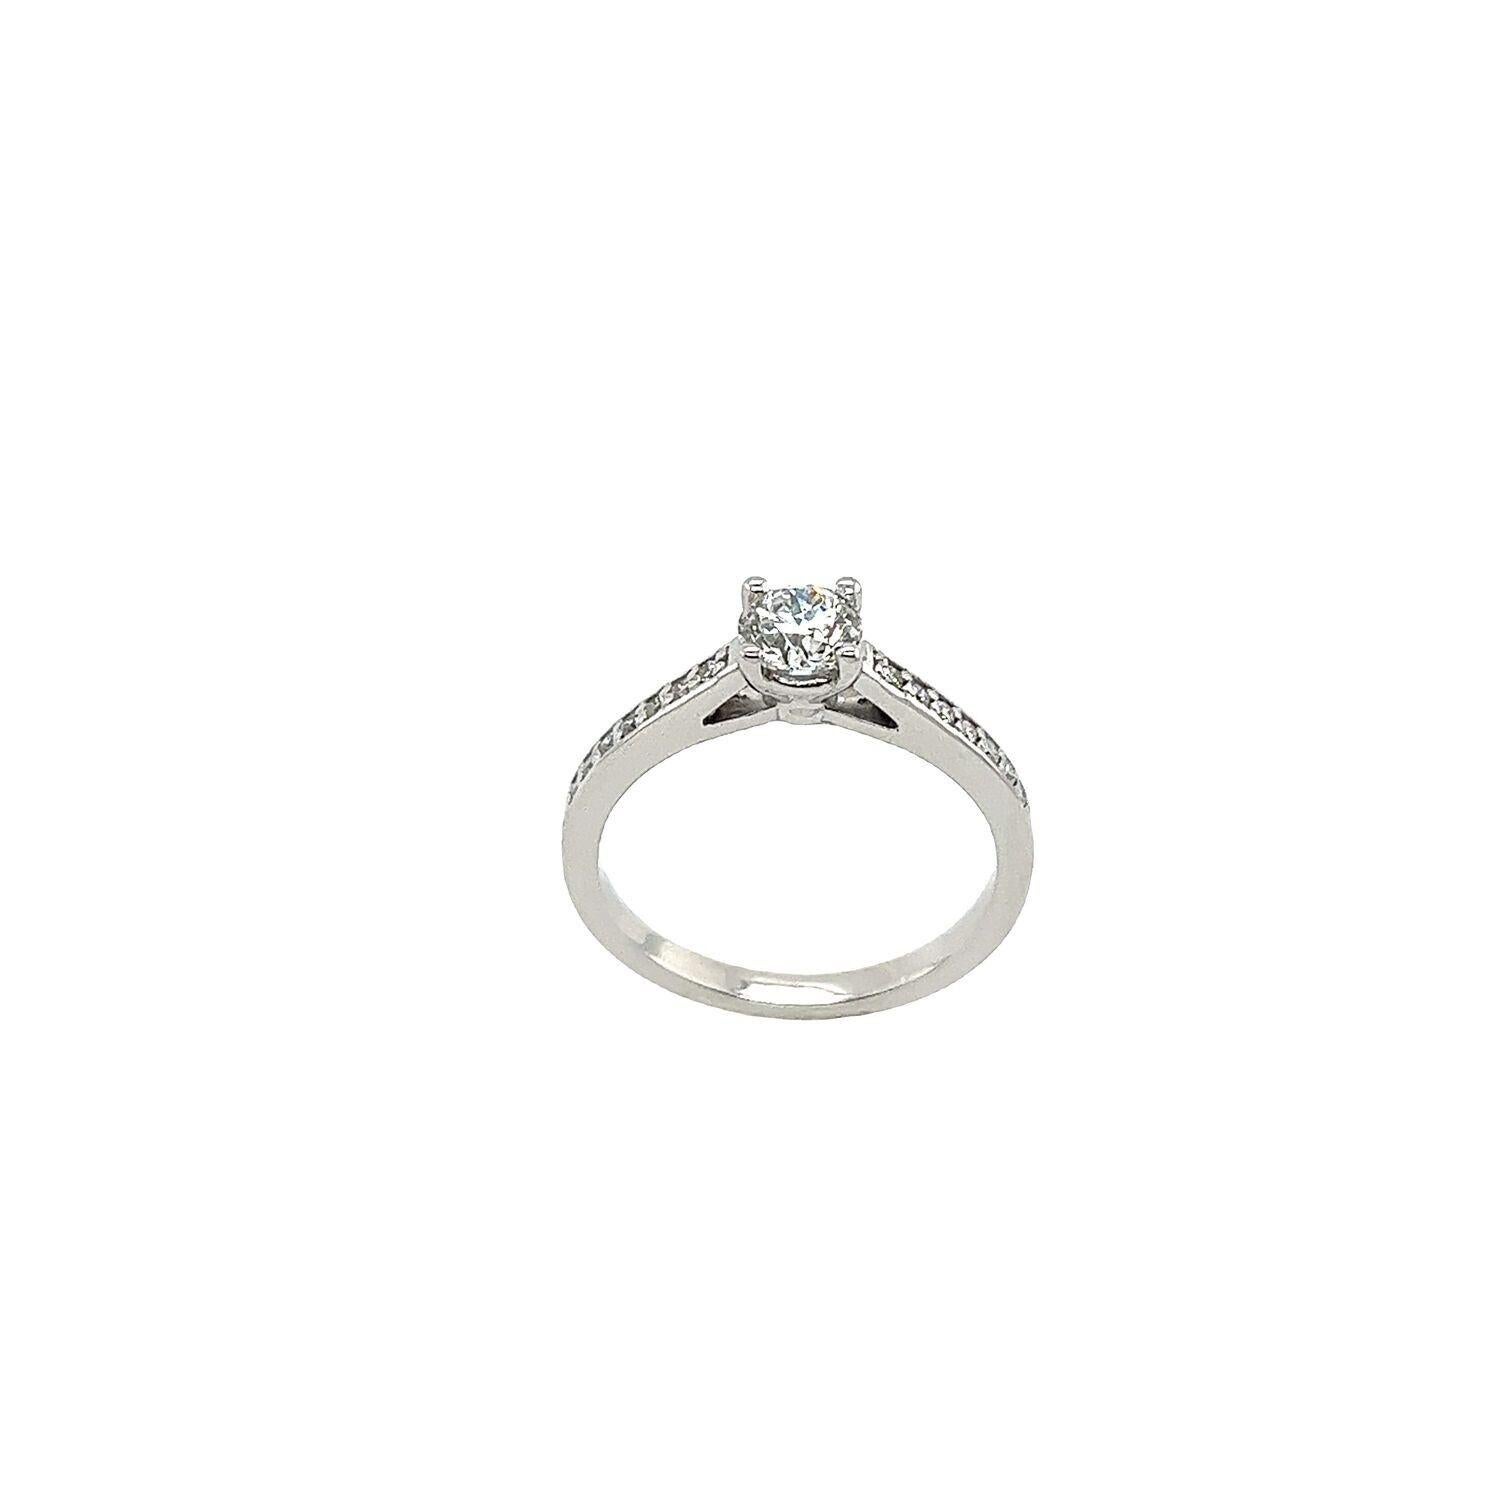 This gorgeous classic solitaire diamond ring set with 0.51ct G/SI2 round brilliant cut diamond IGI certified in 14ct white gold with 14 small diamonds on the shoulders,0.12ct can make a perfect engagement ring for a bride or a birthday present for a